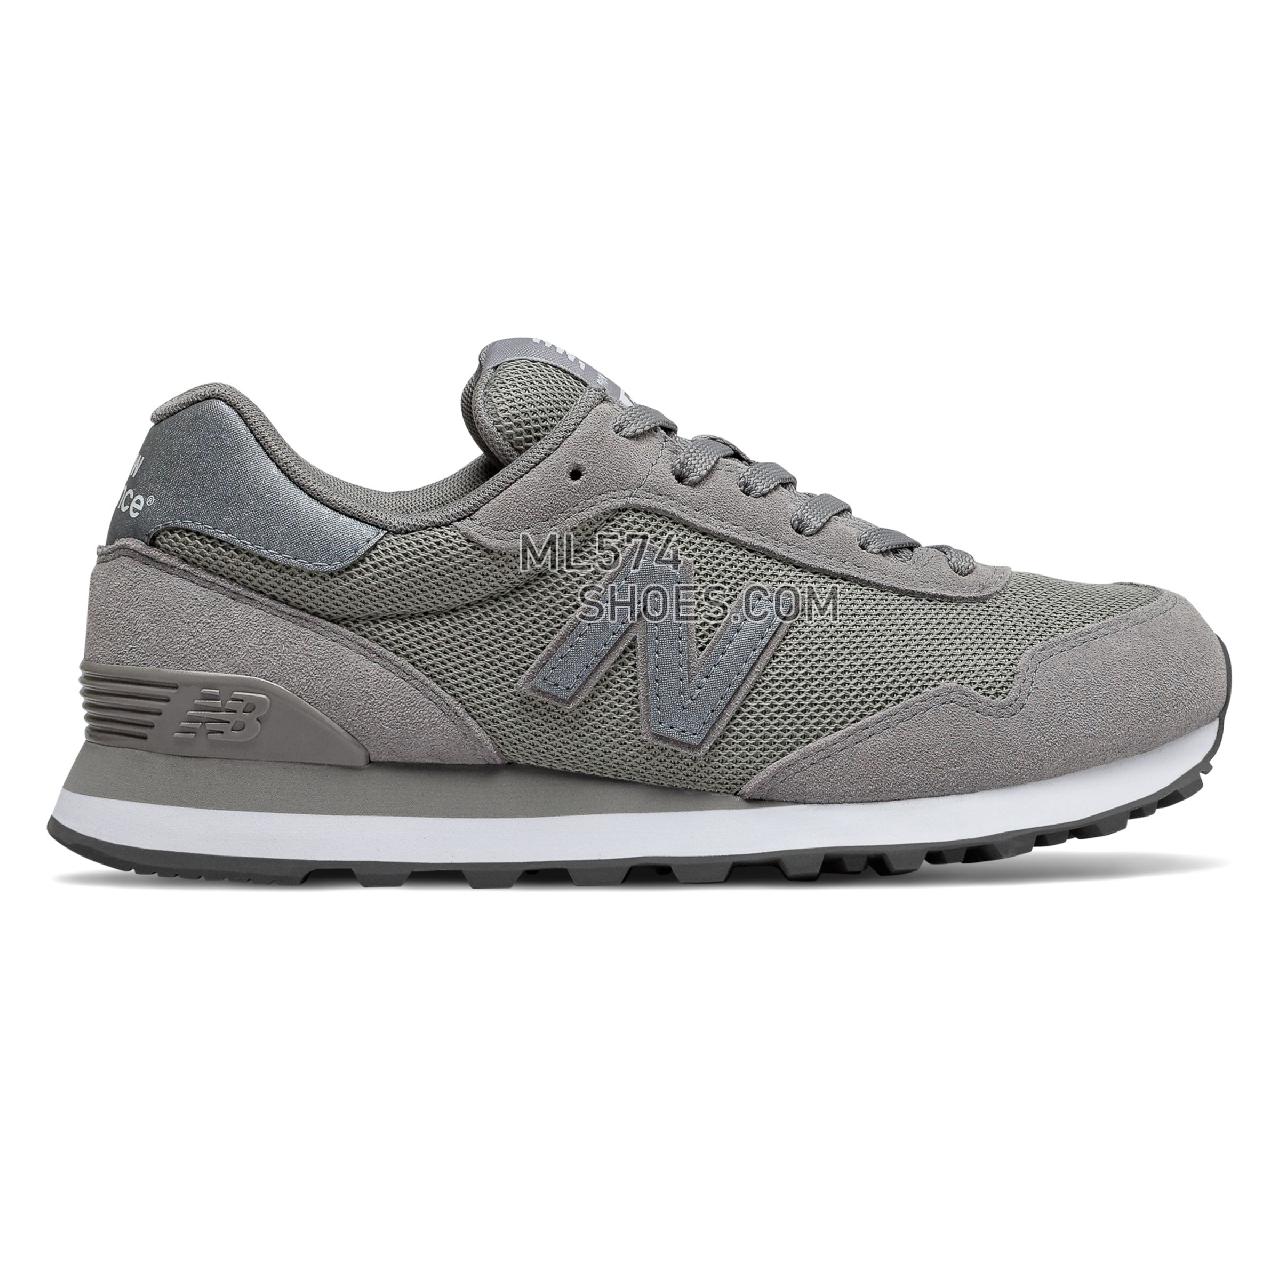 New Balance 515 Classic - Women's Sport Style Sneakers - Marblehead with Magnet and Silver - WL515GBM